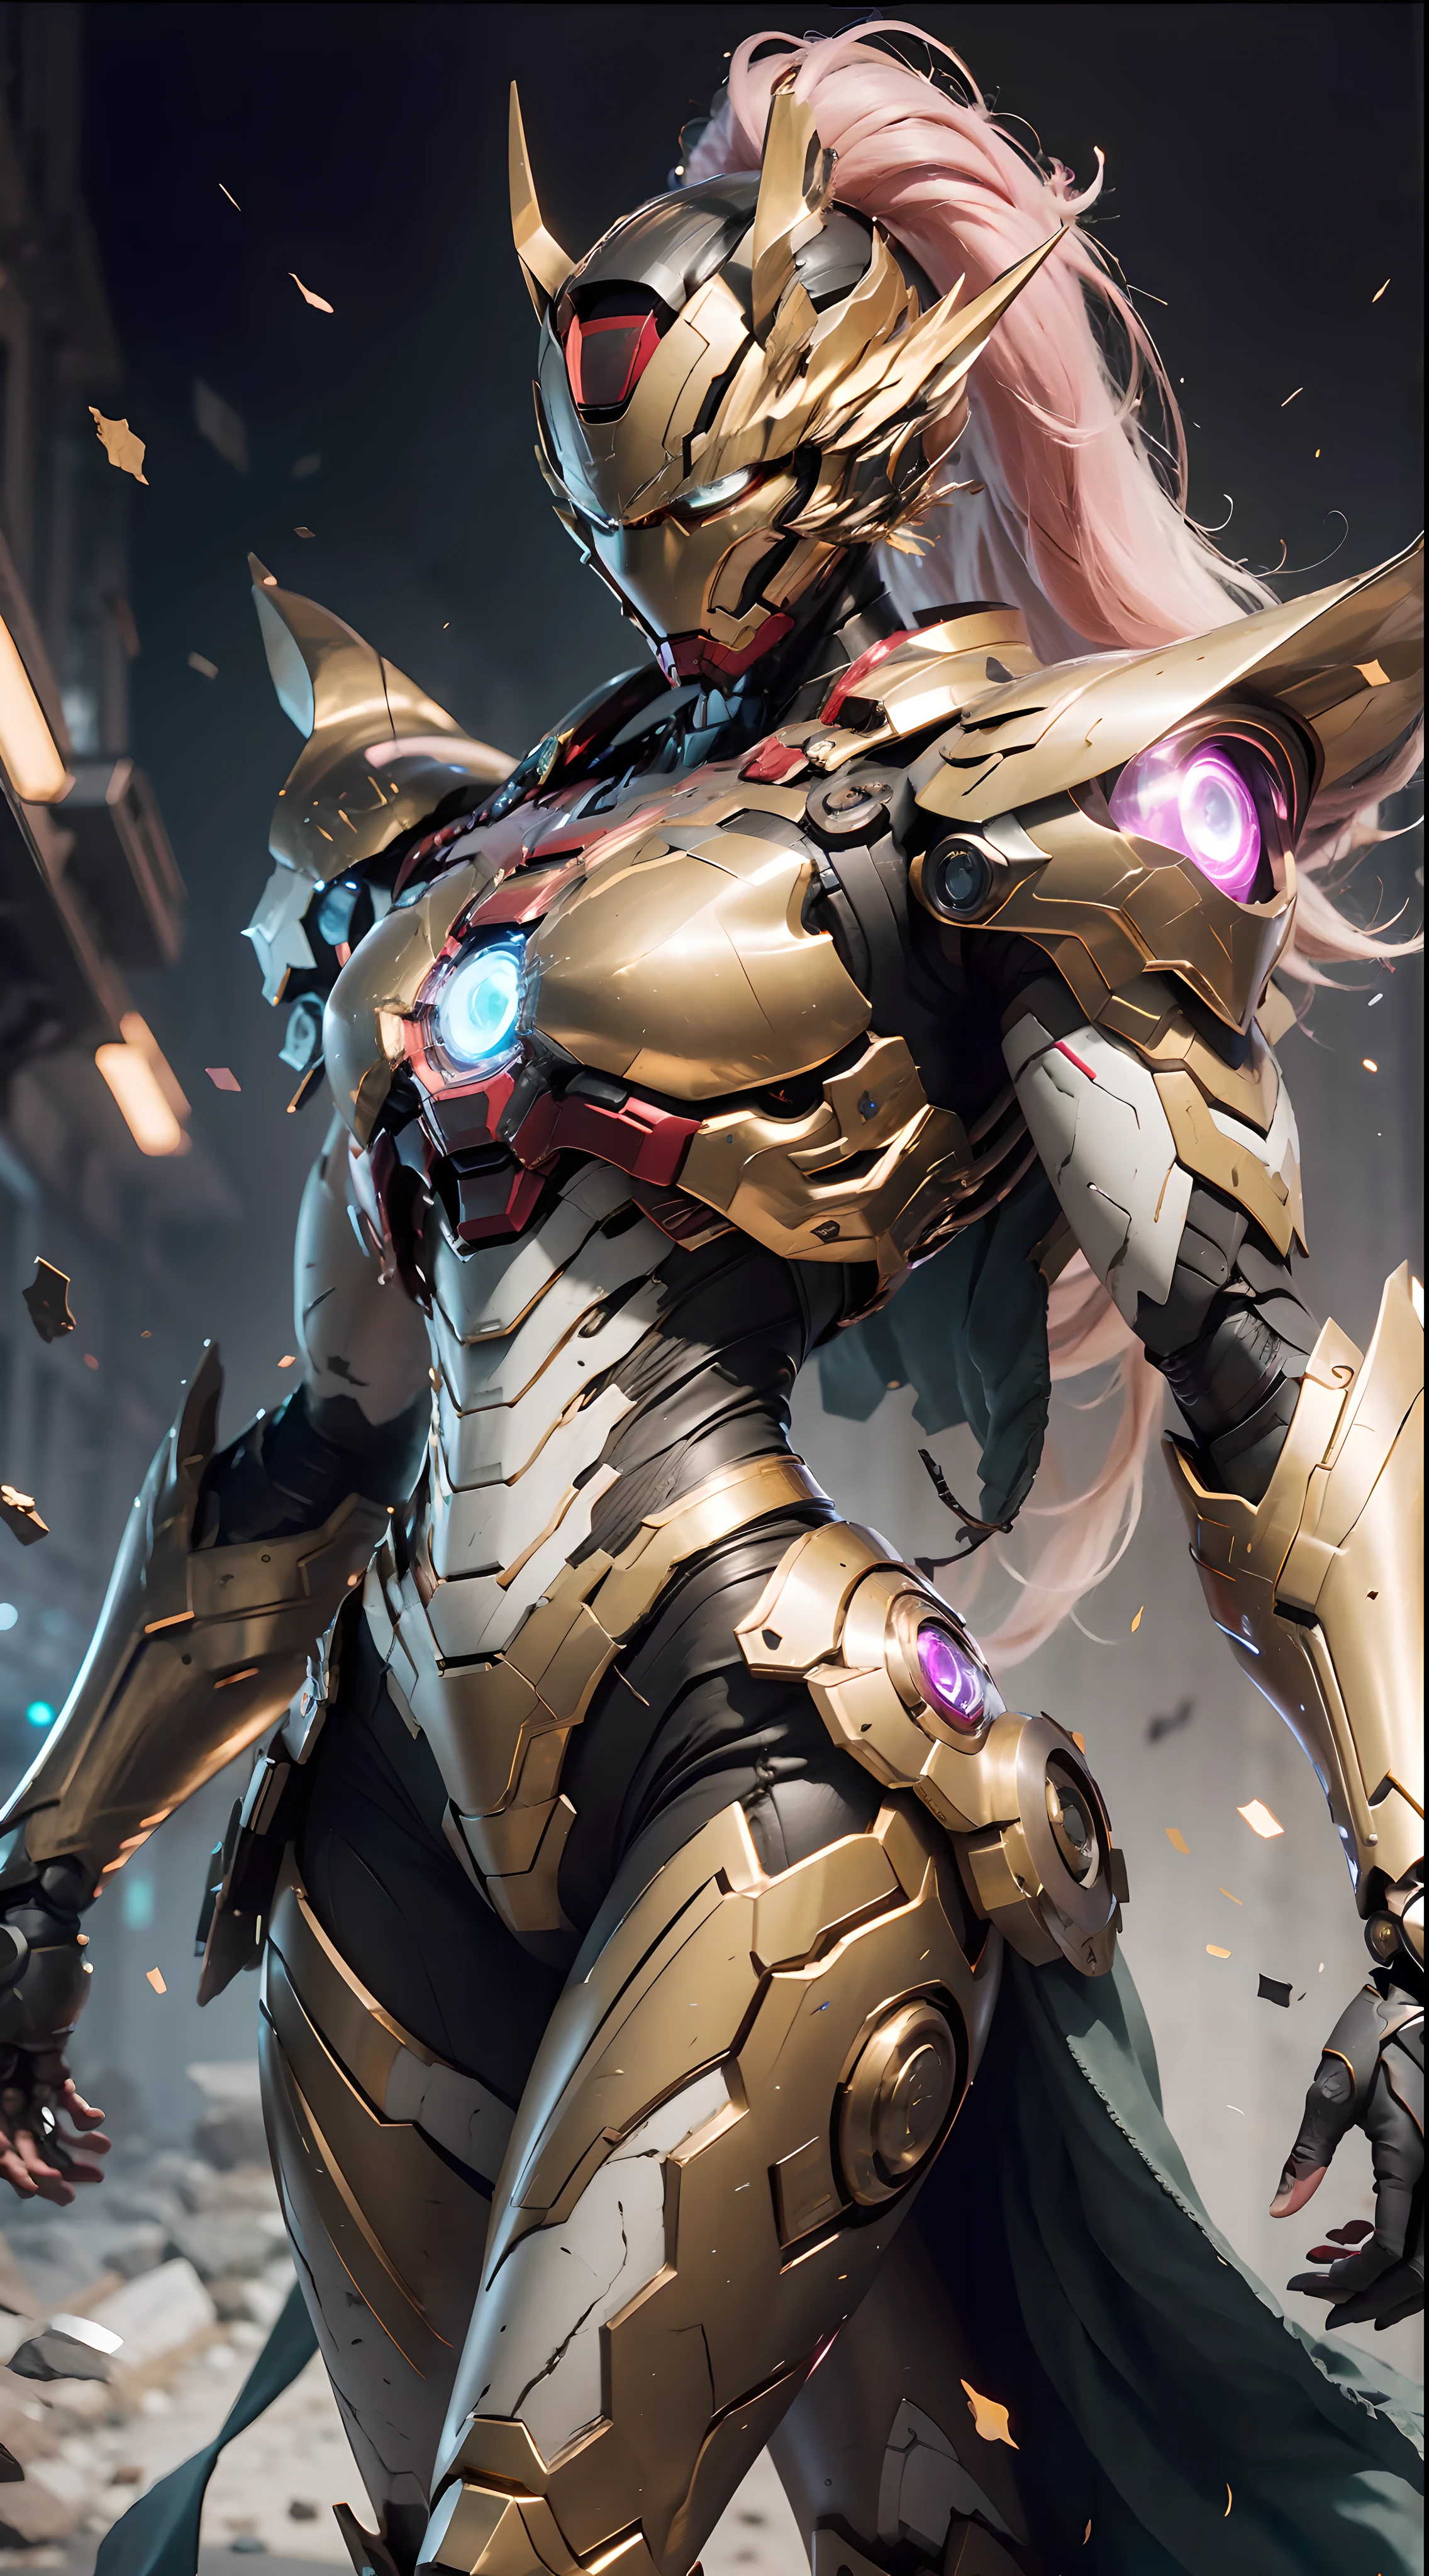 A photo of a dragon princess, gold Saint Seiya limb armor, Marvel movie Iron Man breastplate, (up to 00 Gundam Exia: 1.5), (Mecha) (Mechanical) (Armor), (Open leg: 1.3), Perfect, (Wide Angle), (Black background: 1.6), Best Quality, Masterpiece, Super Resolution, (Reality: 1.4), 1 girl, bare shoulders, crazy details, (hip folds: 1.2), lower chest, side chest, unrealistic engine style, Boca effect, David La Chapelle style lens, bioluminescent palette: light blue, light gold, light pink, bright white, wide angle, super fine, cinematic still life, vibrant, Sakimichan style, perfect eyes, highest image quality 8K, inspired by Harry Winston, Canon EOS R 6 shooting masterpiece" Chaos 50,--, Under Eye Mole, ray tracing, surrealism, textured skin --s2